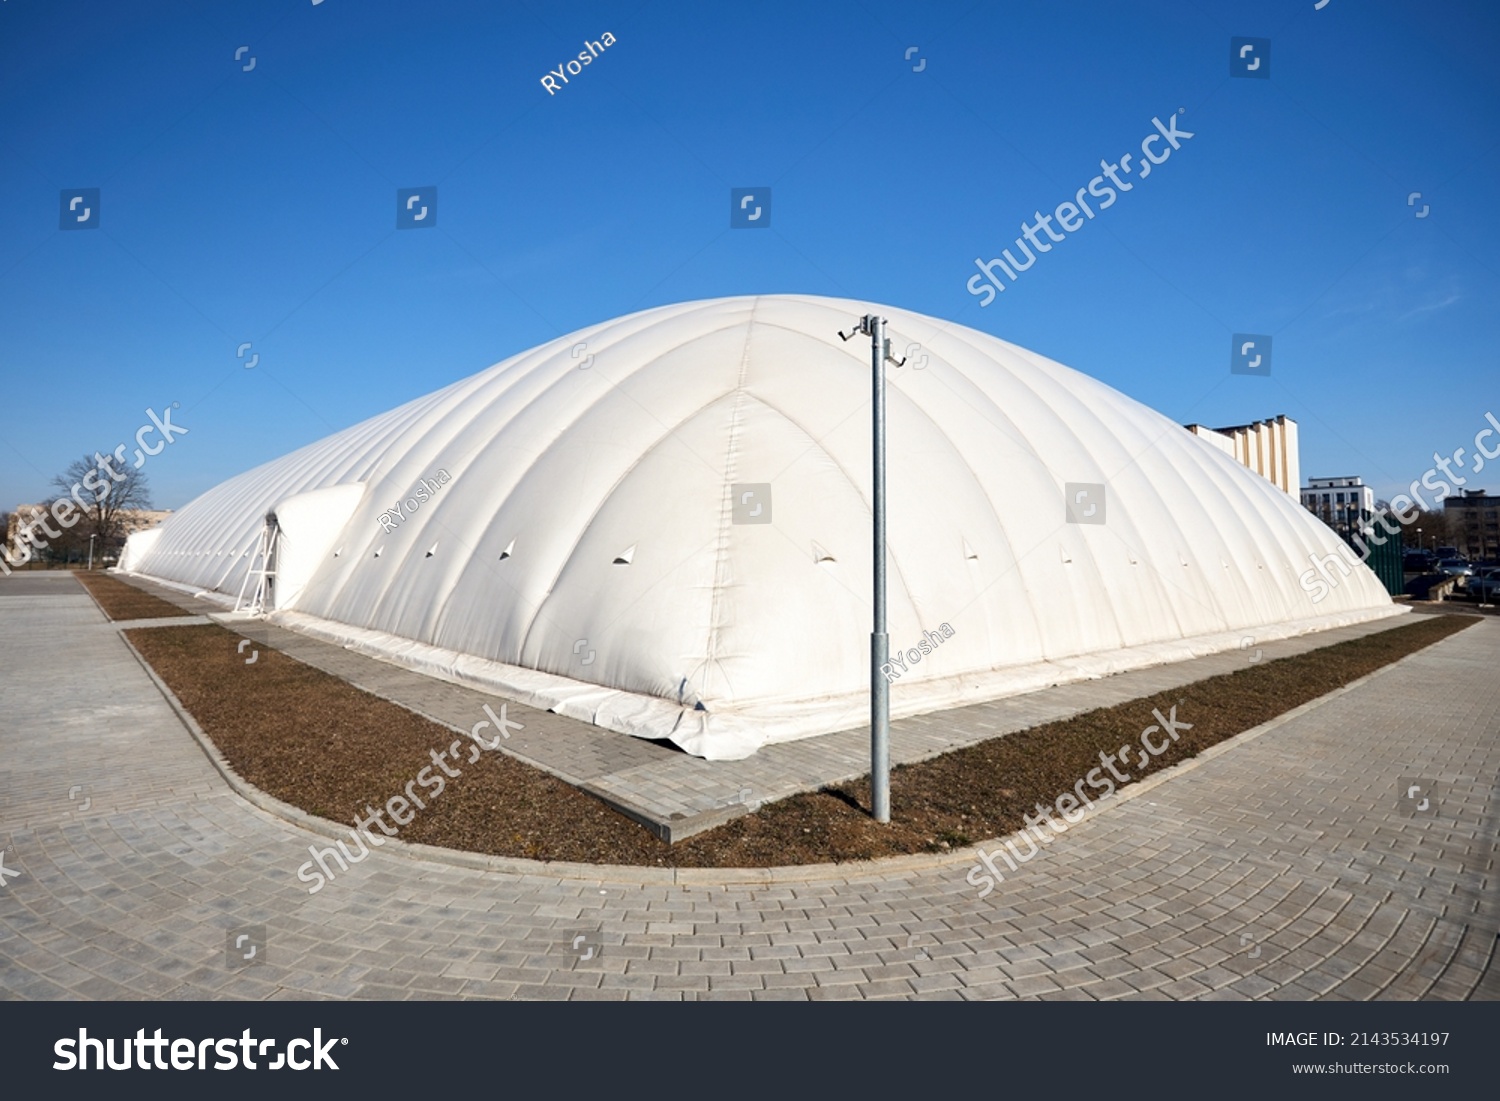 Inflatable air dome stadium. Inflated Tennis air dome or Tennis bubble arena. Modern urban architecture example as pneumatic stadium dome. #2143534197